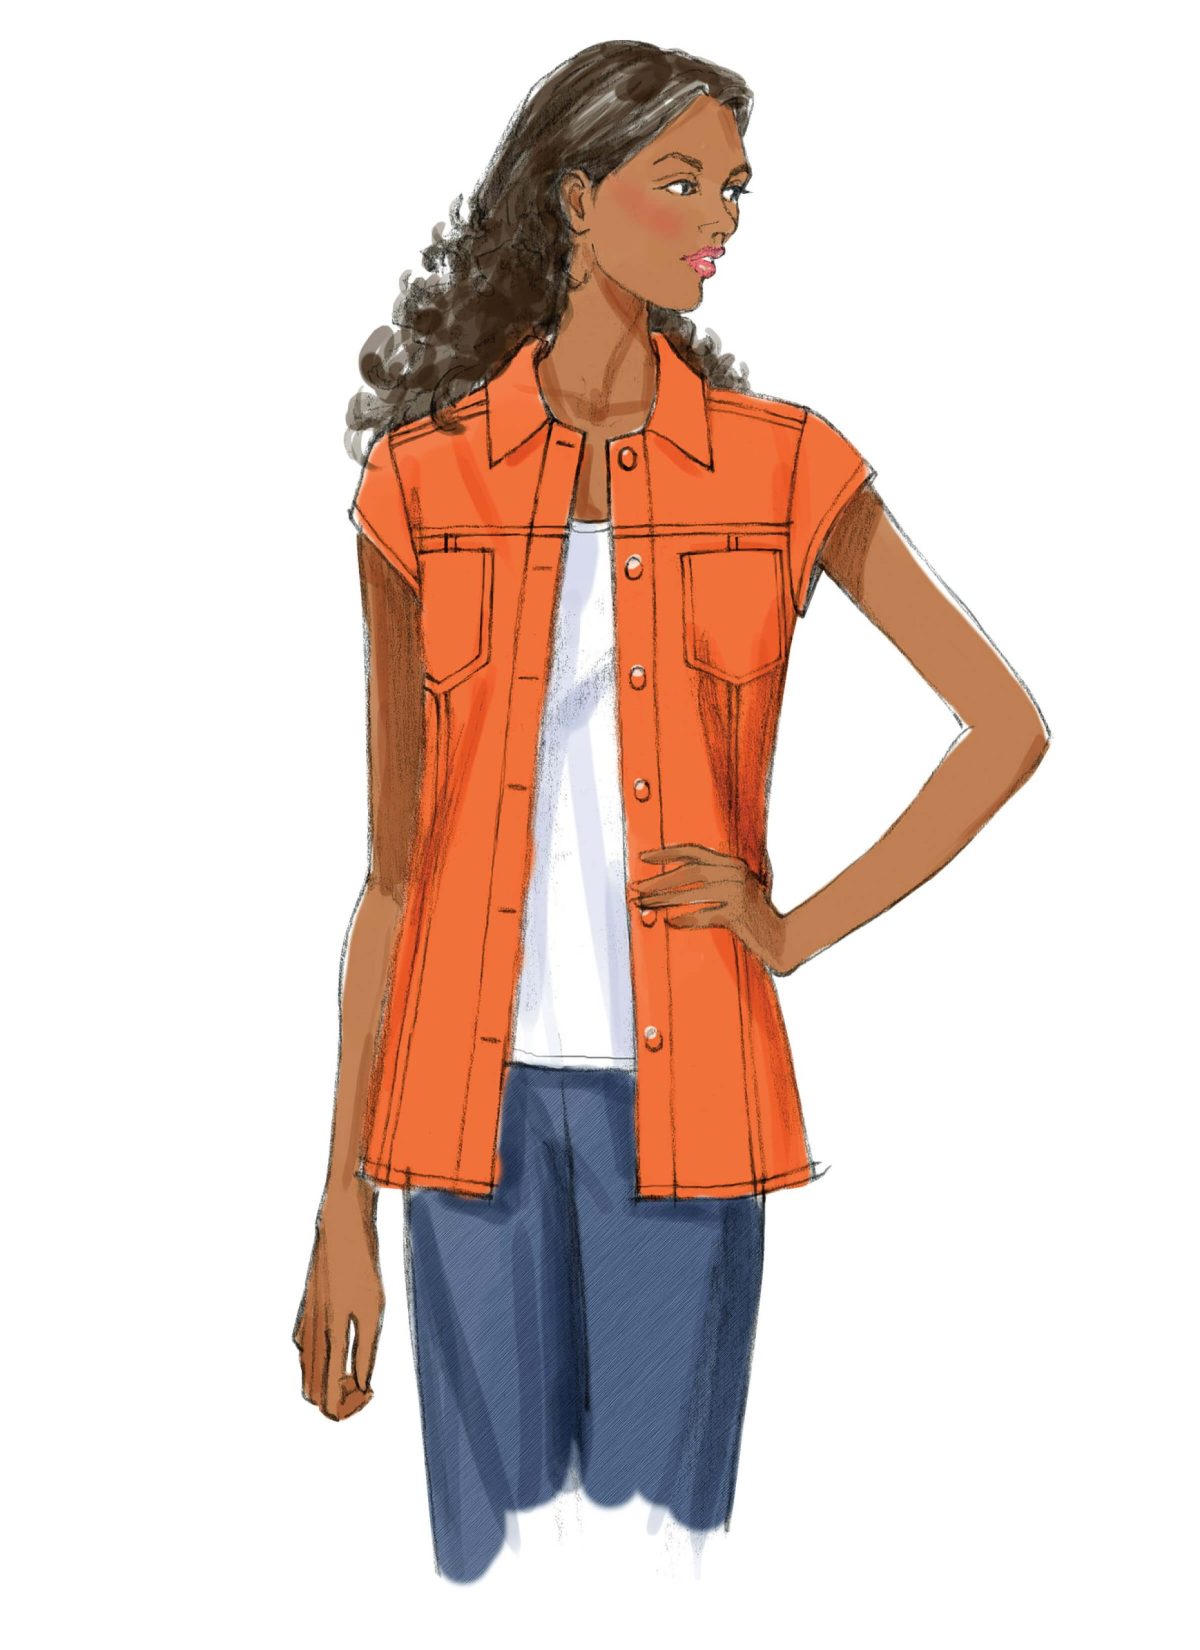 Butterick Sewing Pattern B5616 Misses' Jacket